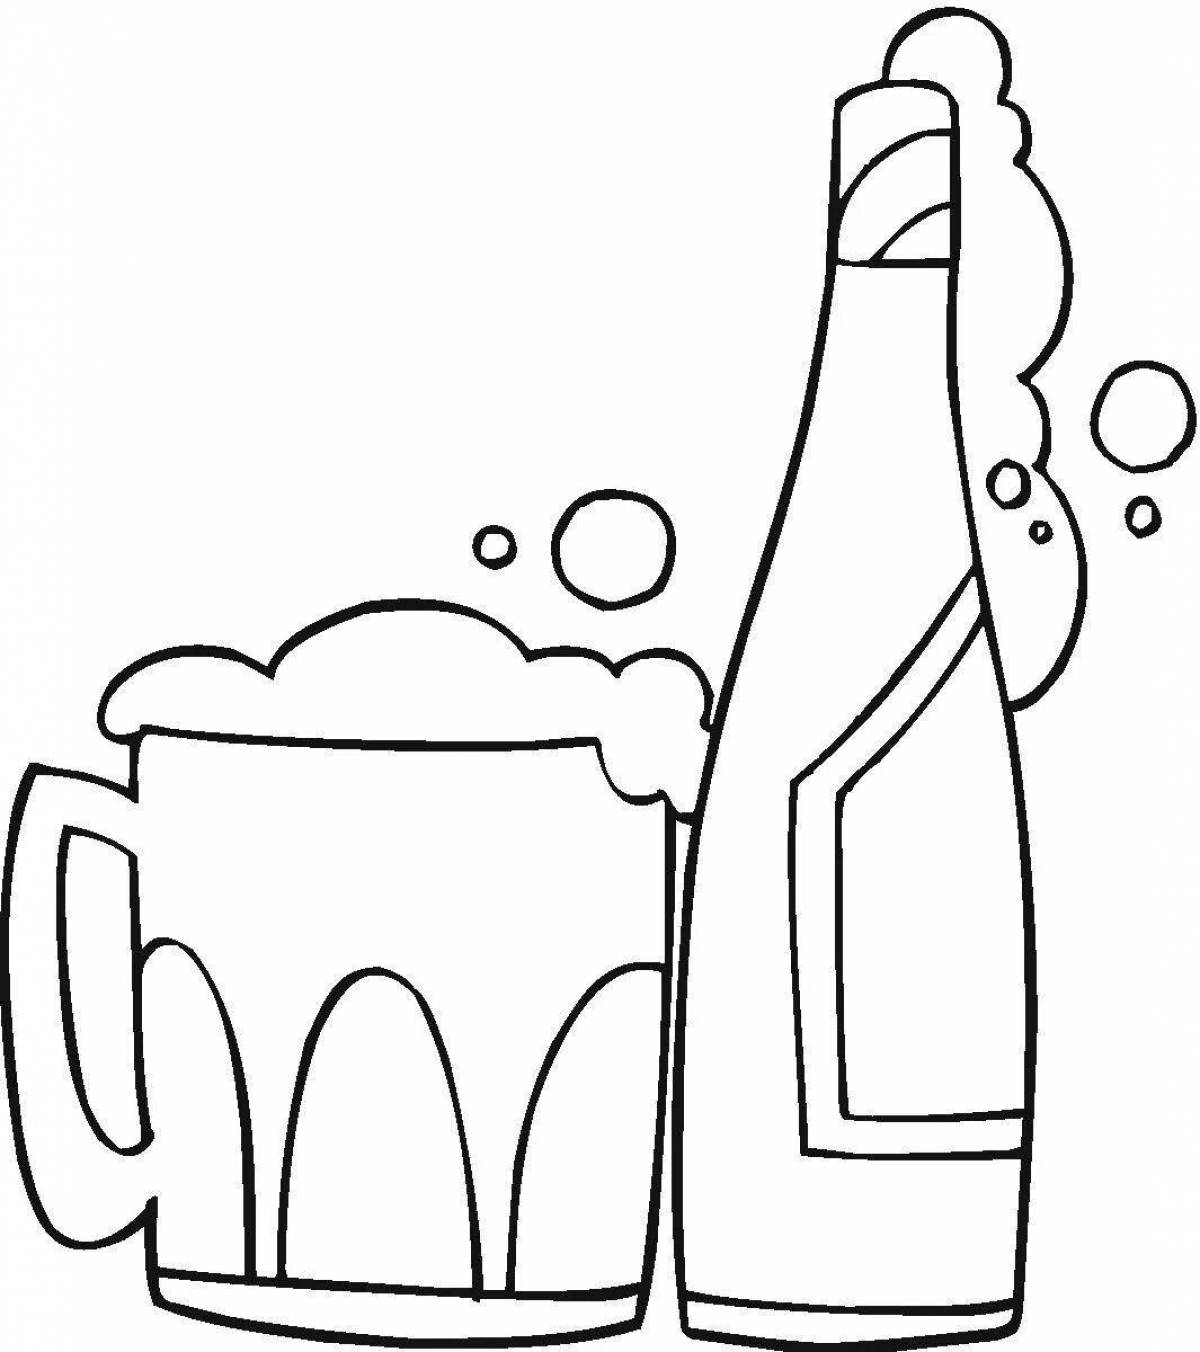 Attractive alcohol bottle coloring book